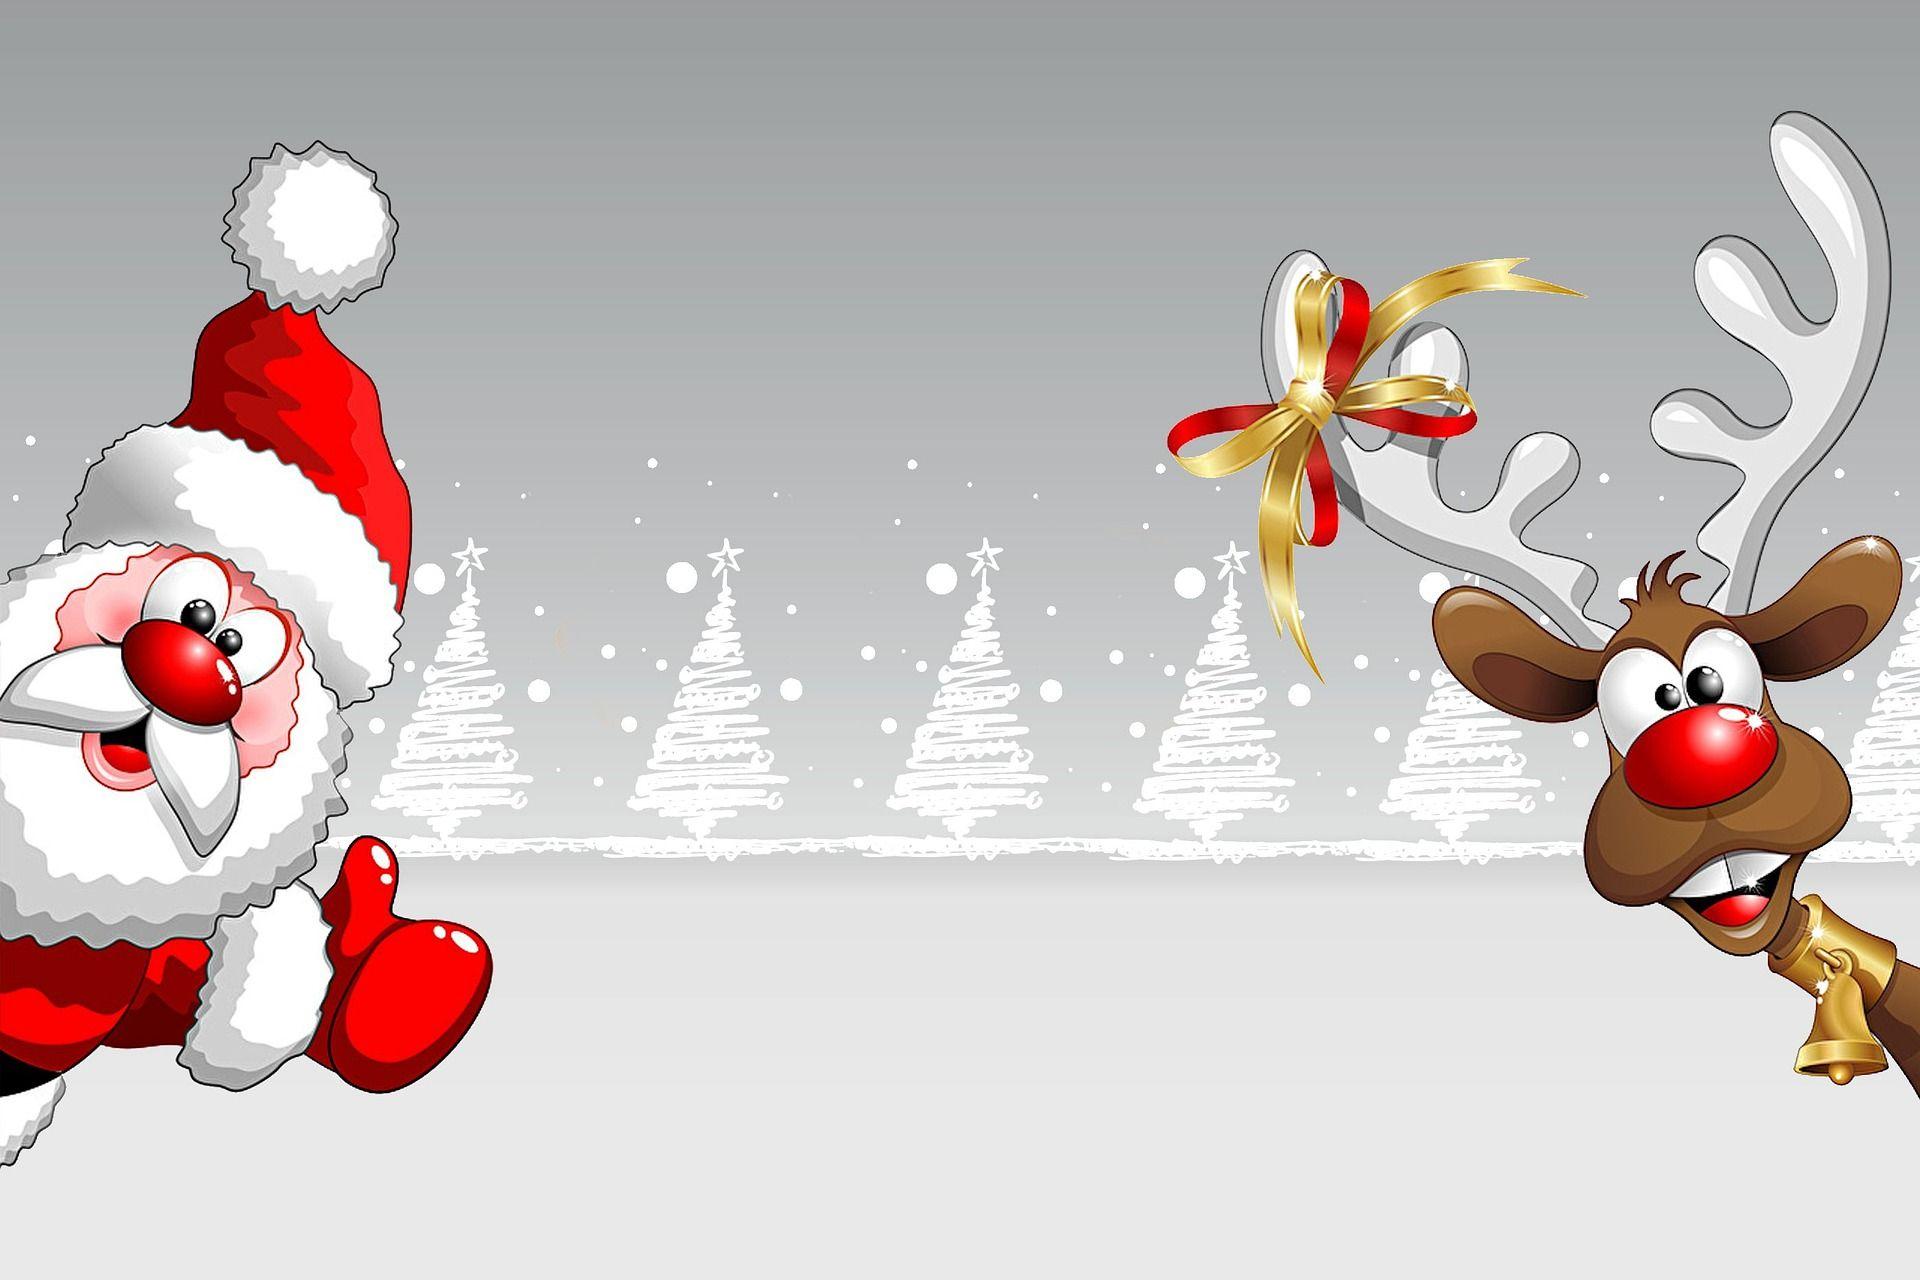 Santa Clause And Rudolph The Red Nosed Reindeer Wallpaper Art